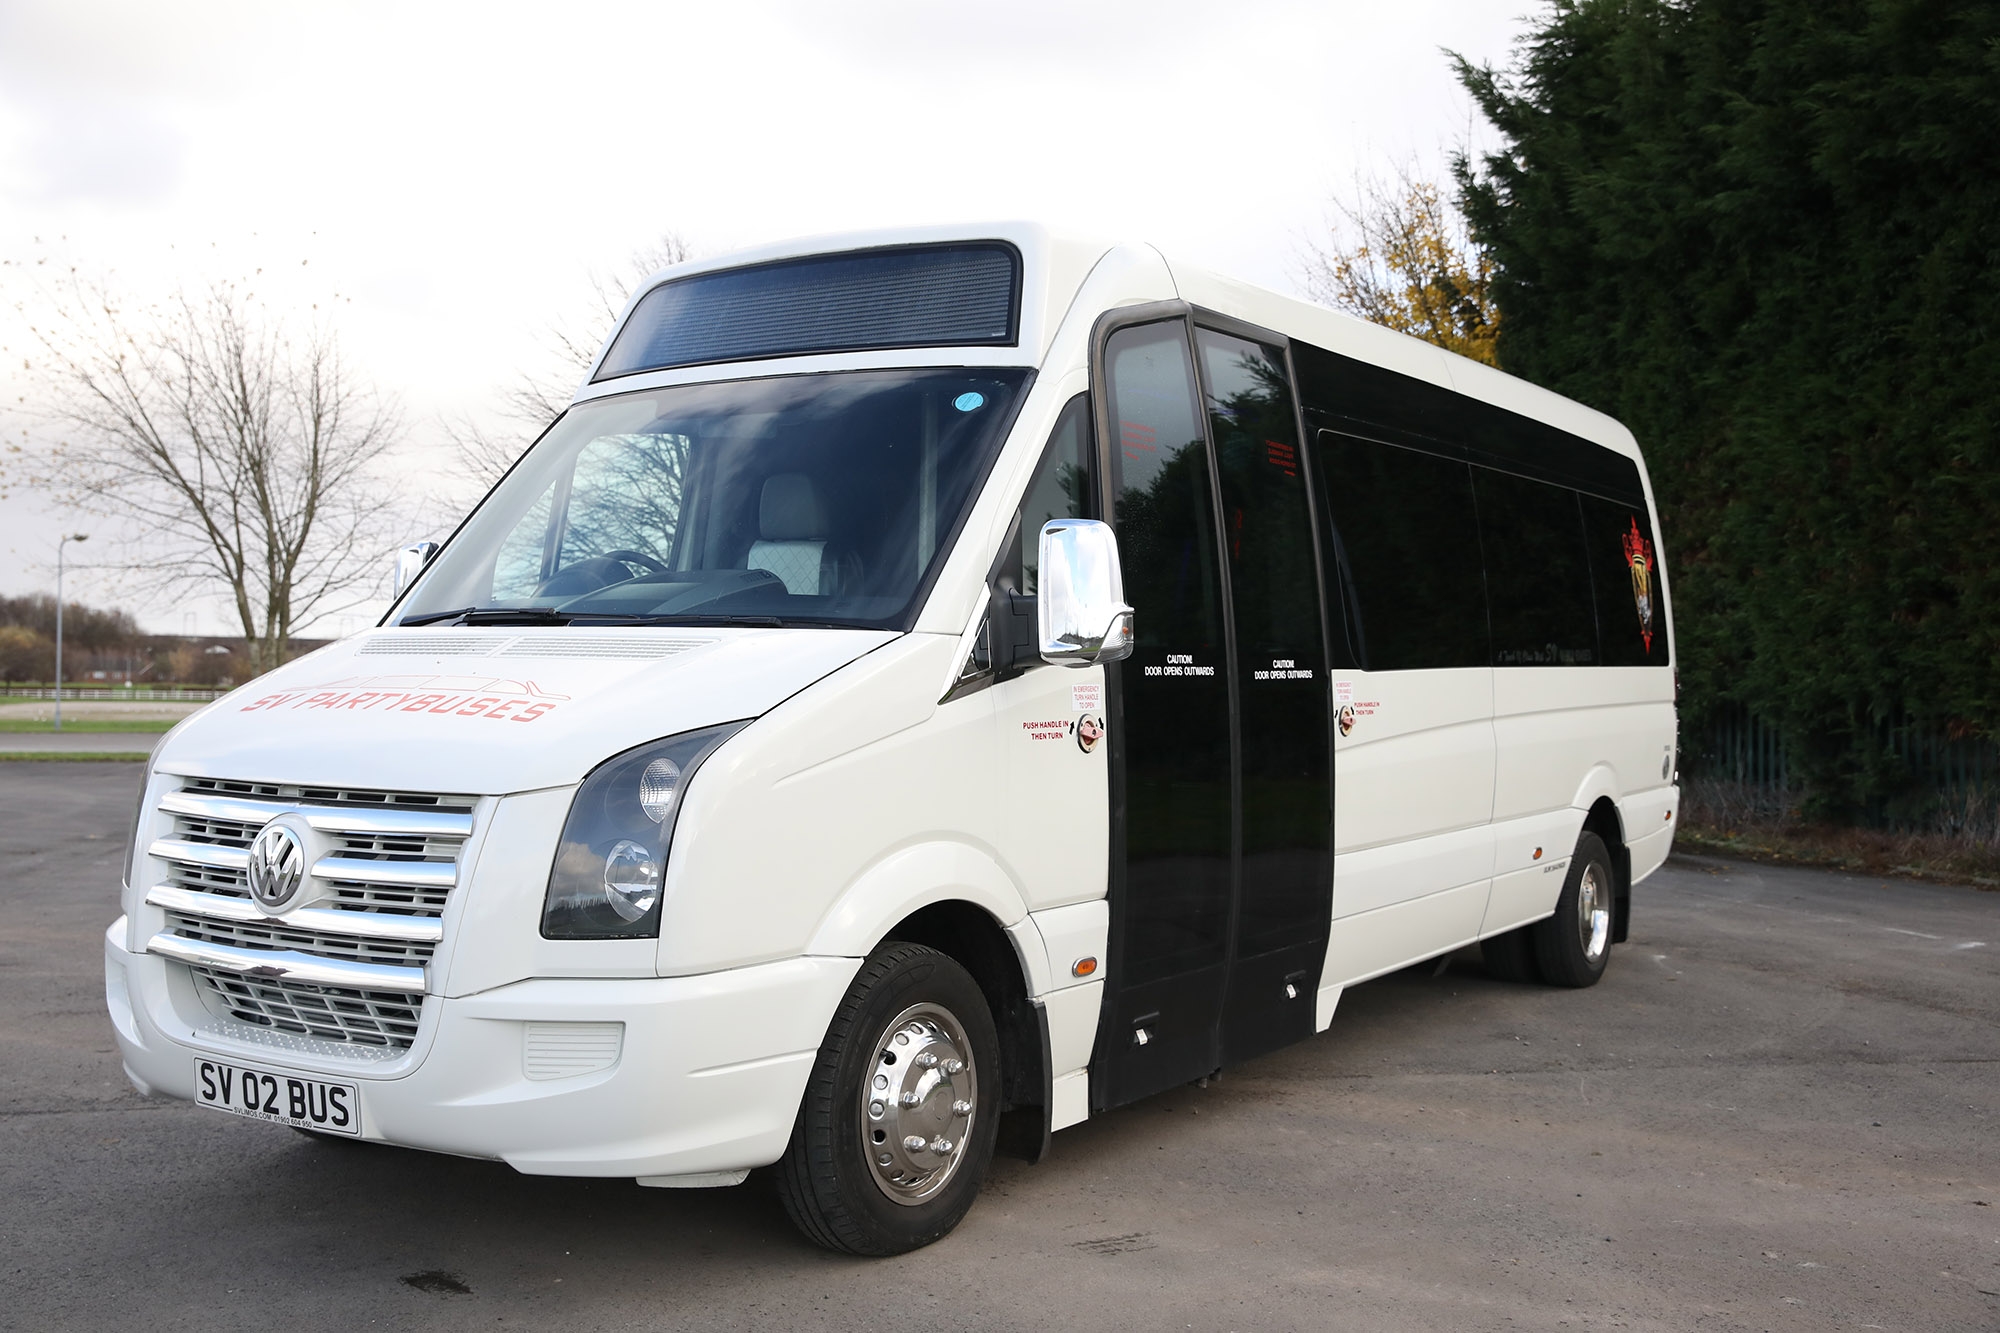 Make Your Prom Night Unforgettable with the Best Party Bus Hire Service